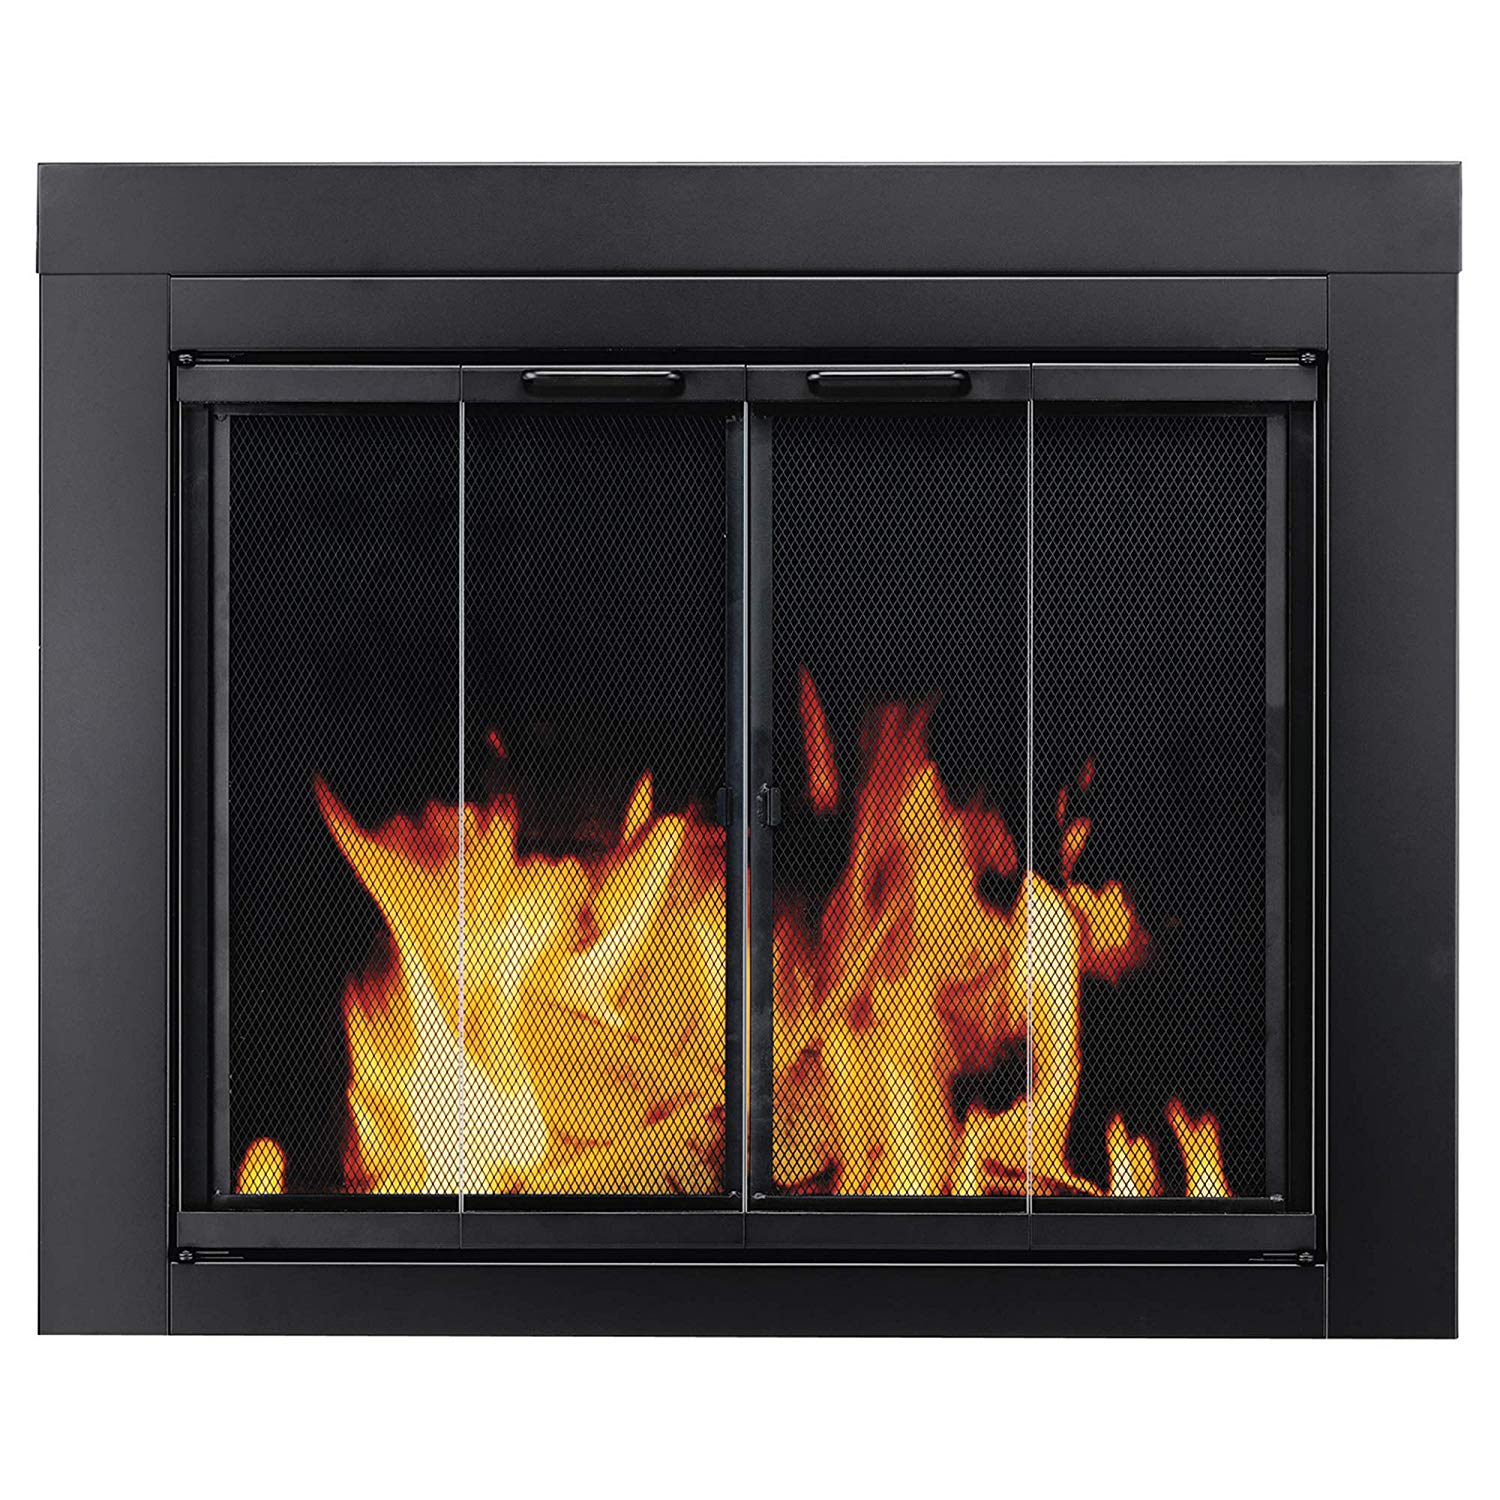 Fireplace Items Beautiful Pleasant Hearth at 1000 ascot Fireplace Glass Door Black Small